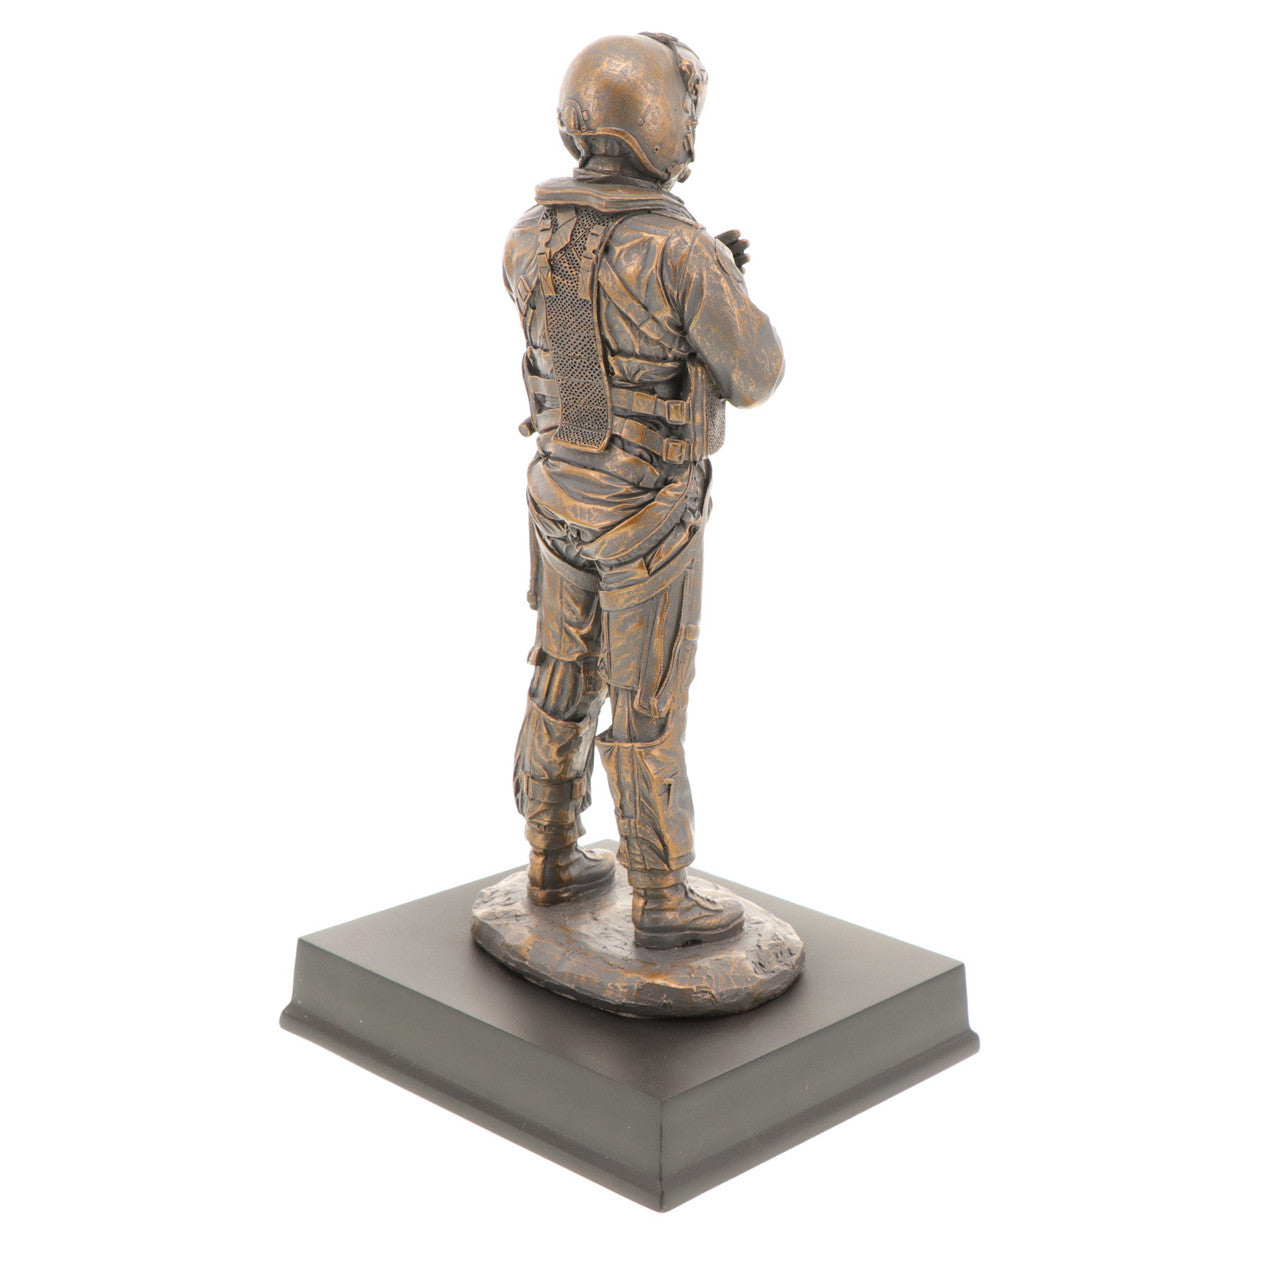 The limited edition RAAF Aviator Figurine is a stunning depiction of a Royal Australian Air Force aviator ready for flight. Crafted with meticulous attention to detail, this cold-cast bronze figurine captures the essence of the RAAF's expertise and dedication to maintaining Australia's air power. www.defenceqstore.com.au